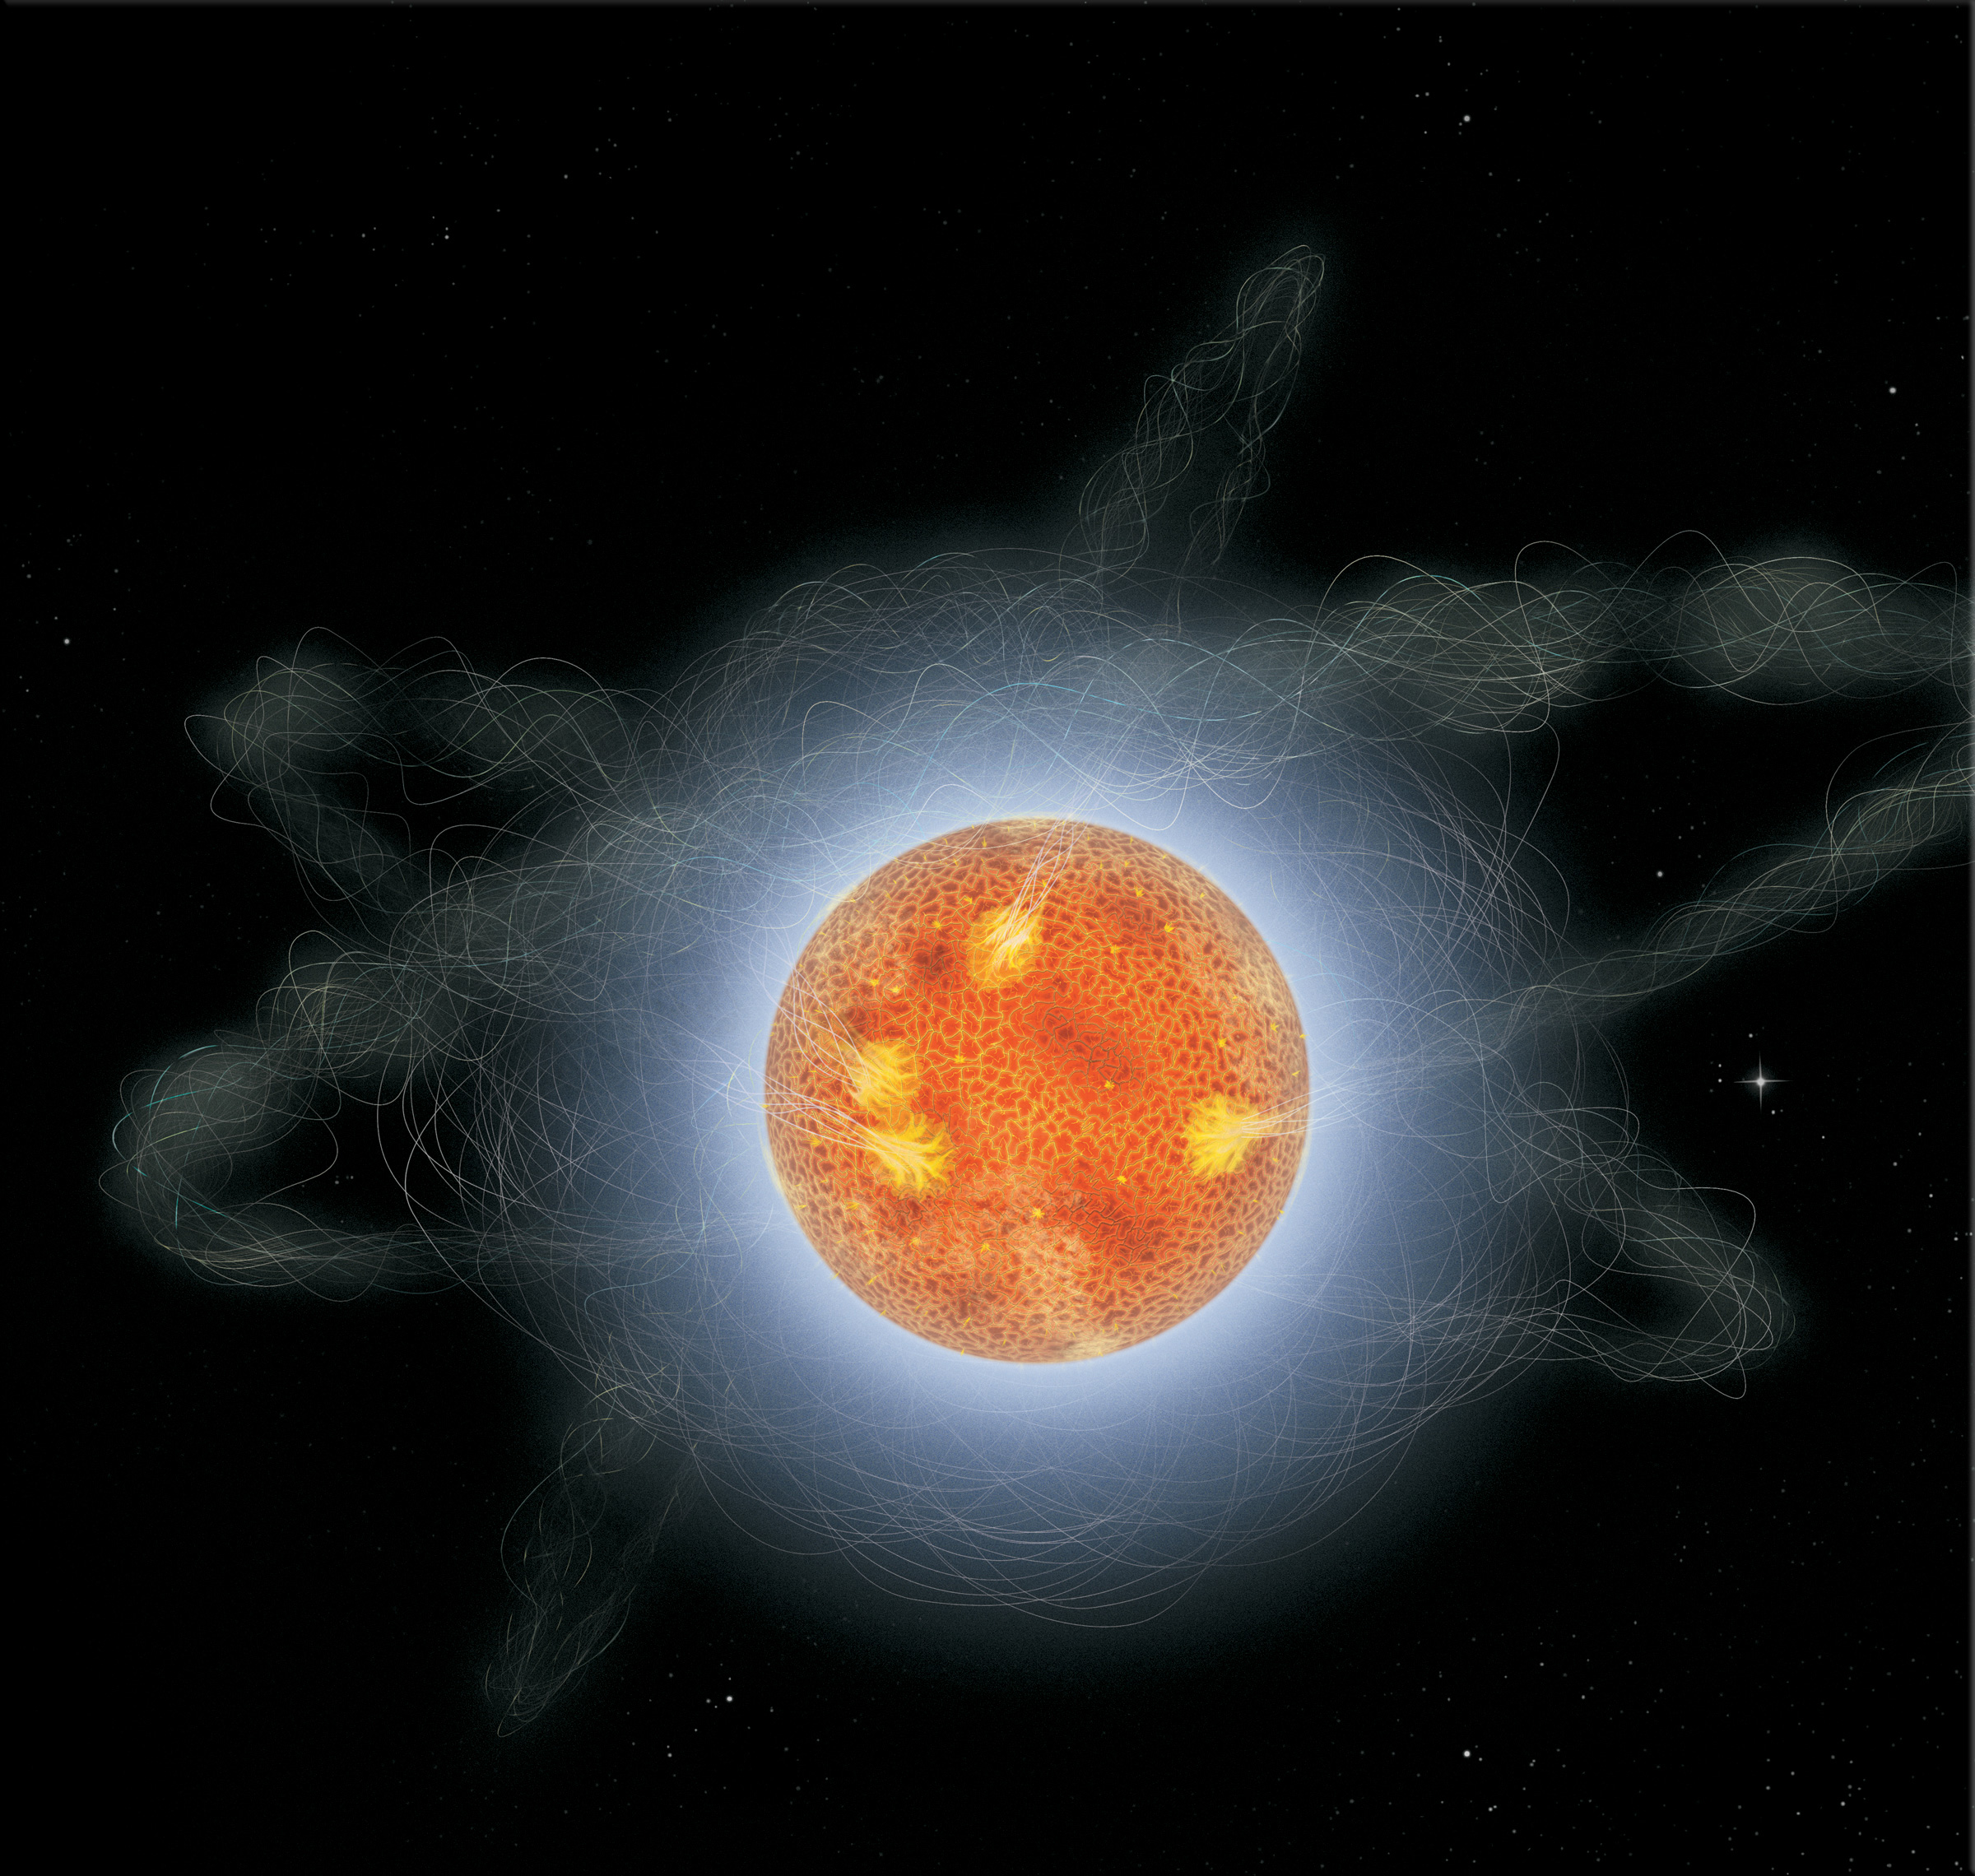 Artist rendering depicts how a magnetar might appear if we could travel to one and view it up close, something that would not be advisable, credit: Sky & Telescope, Gregg Dinderman